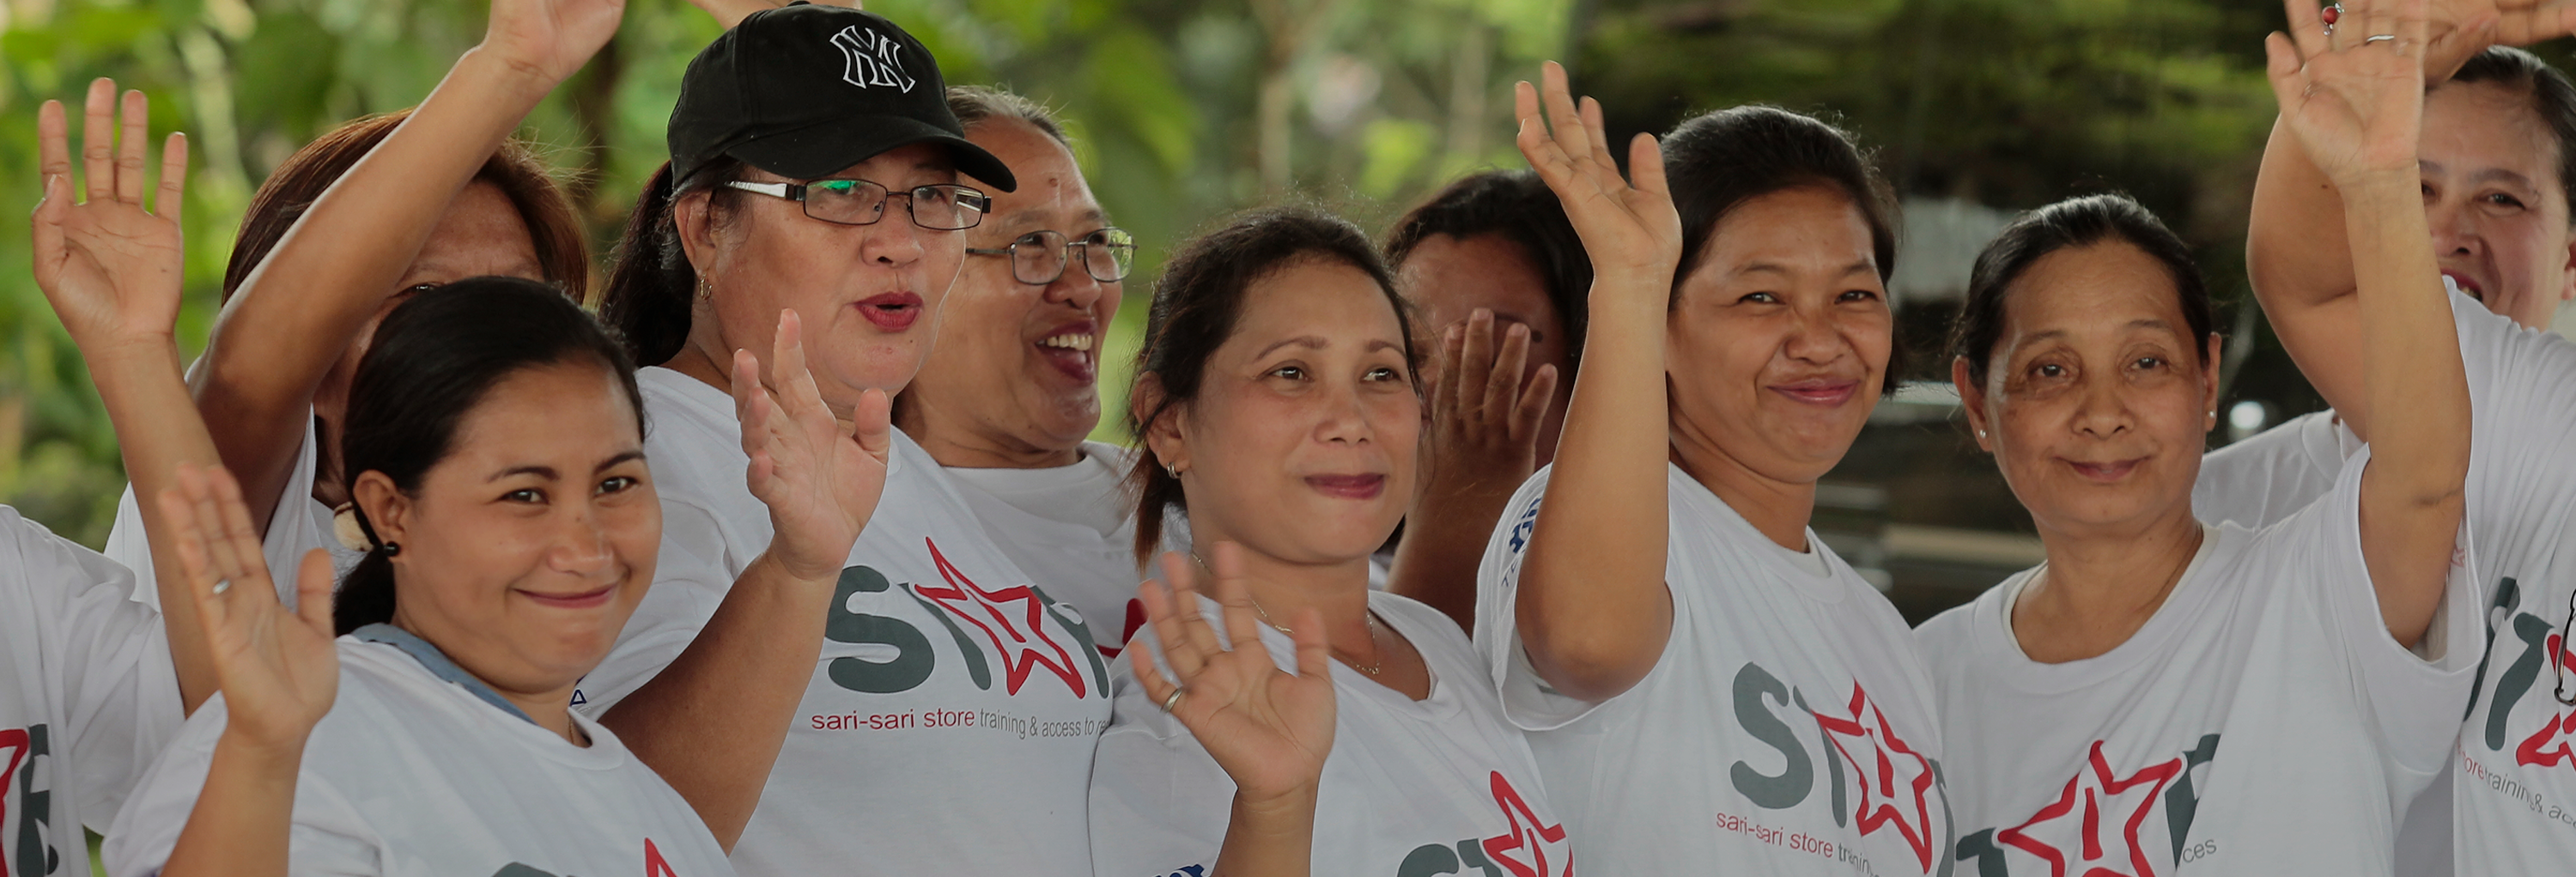 Group of women with STAR Project T-shirts waving